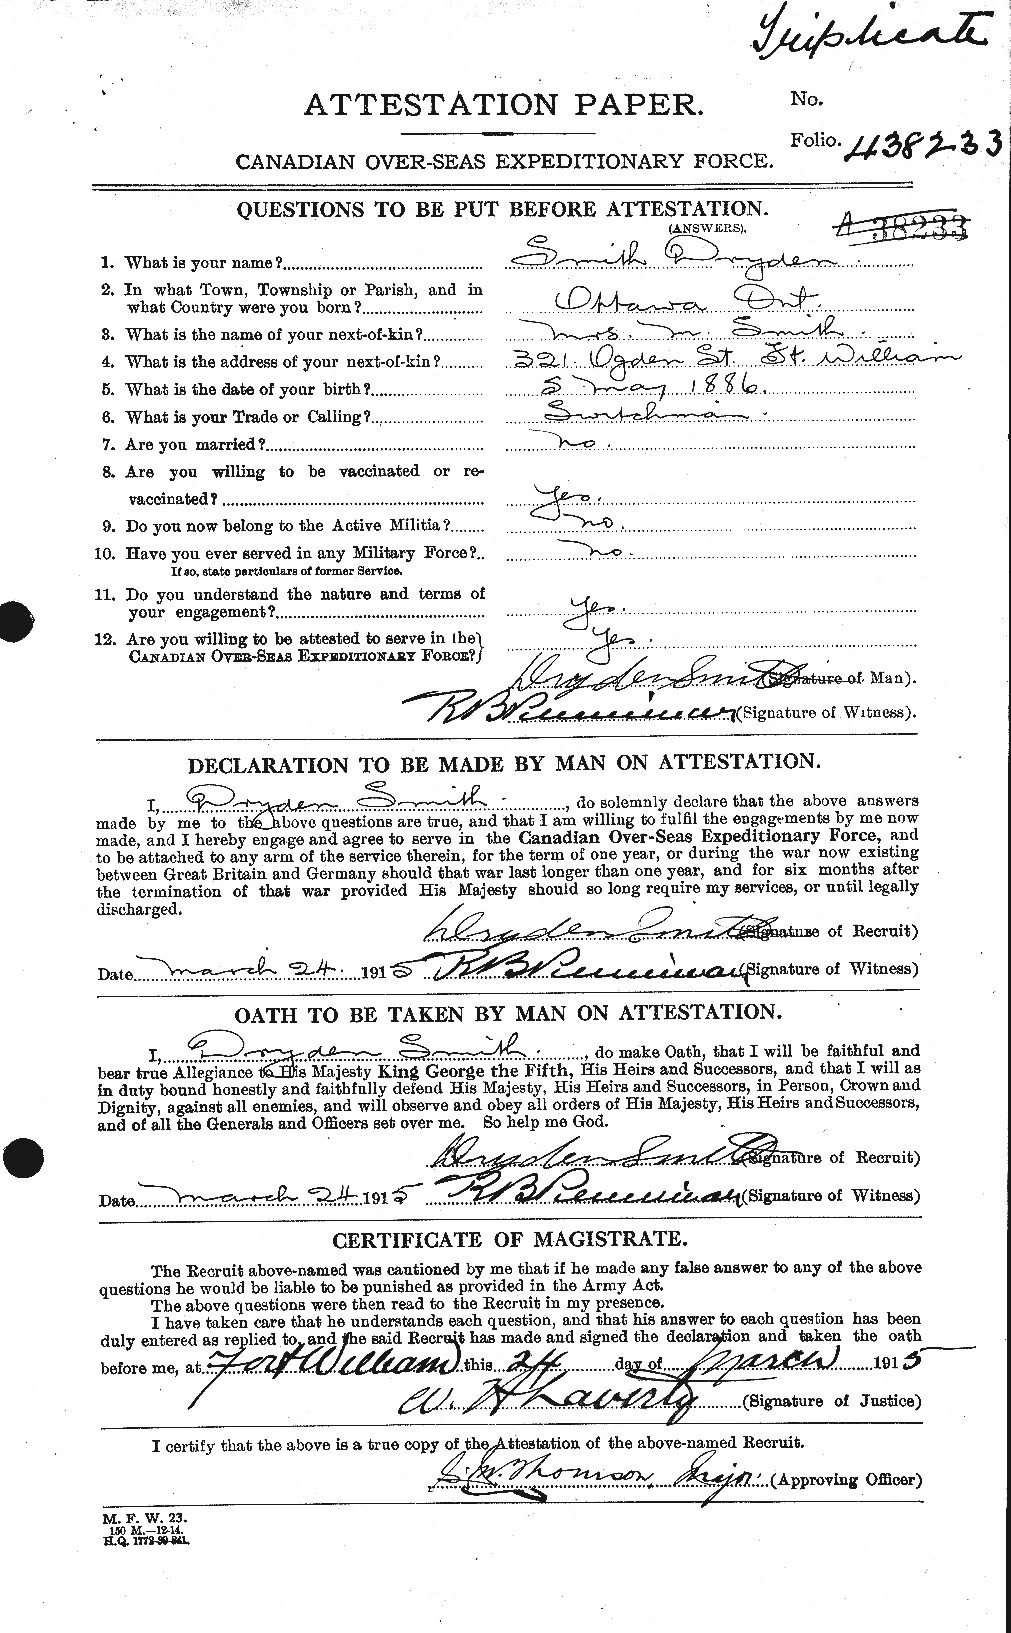 Personnel Records of the First World War - CEF 101745a